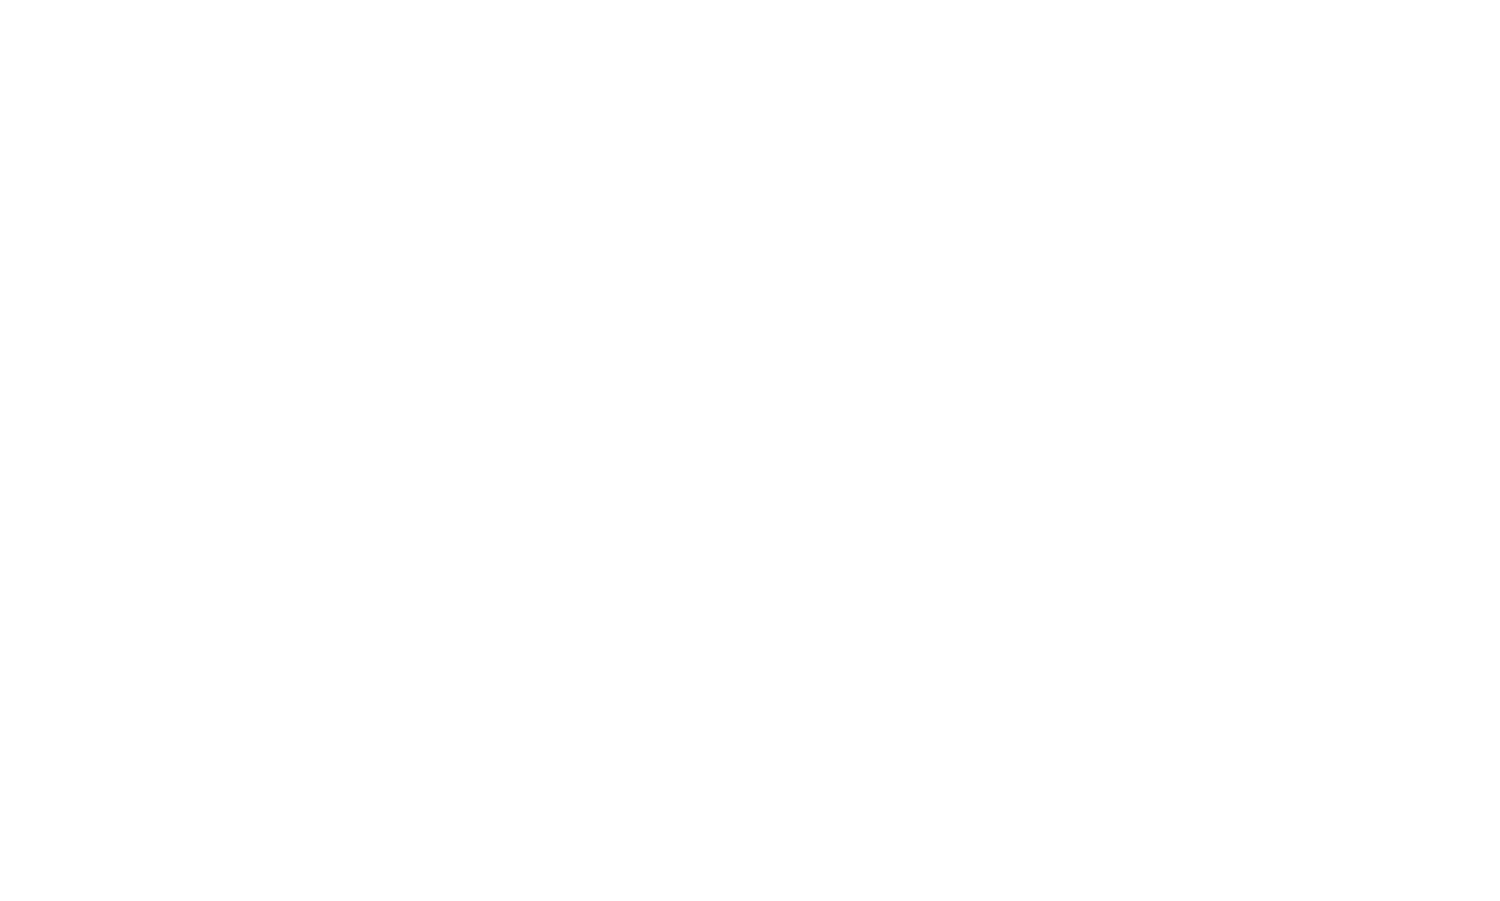 THE STORY CONSULTANT